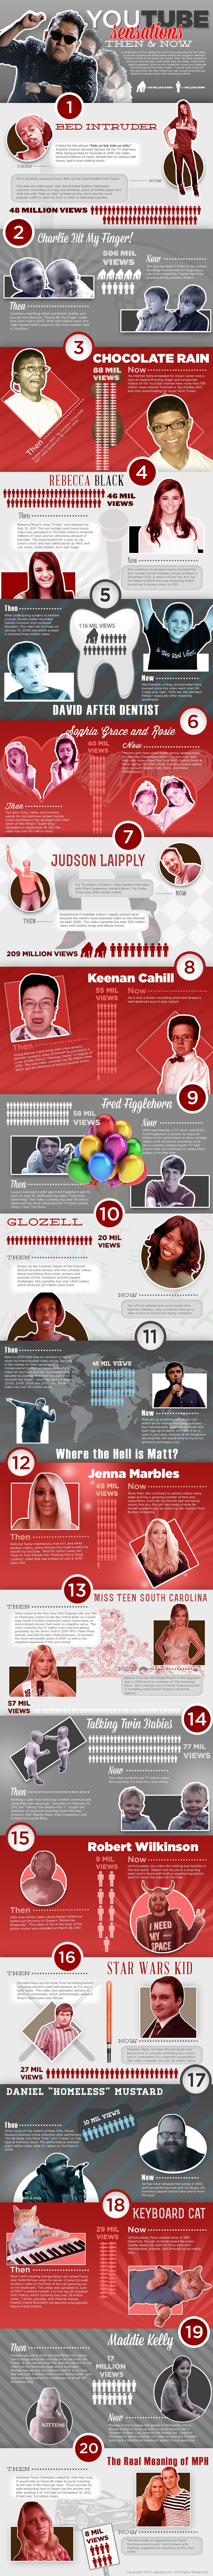 YouTube Sensations Then And Now [infographic]